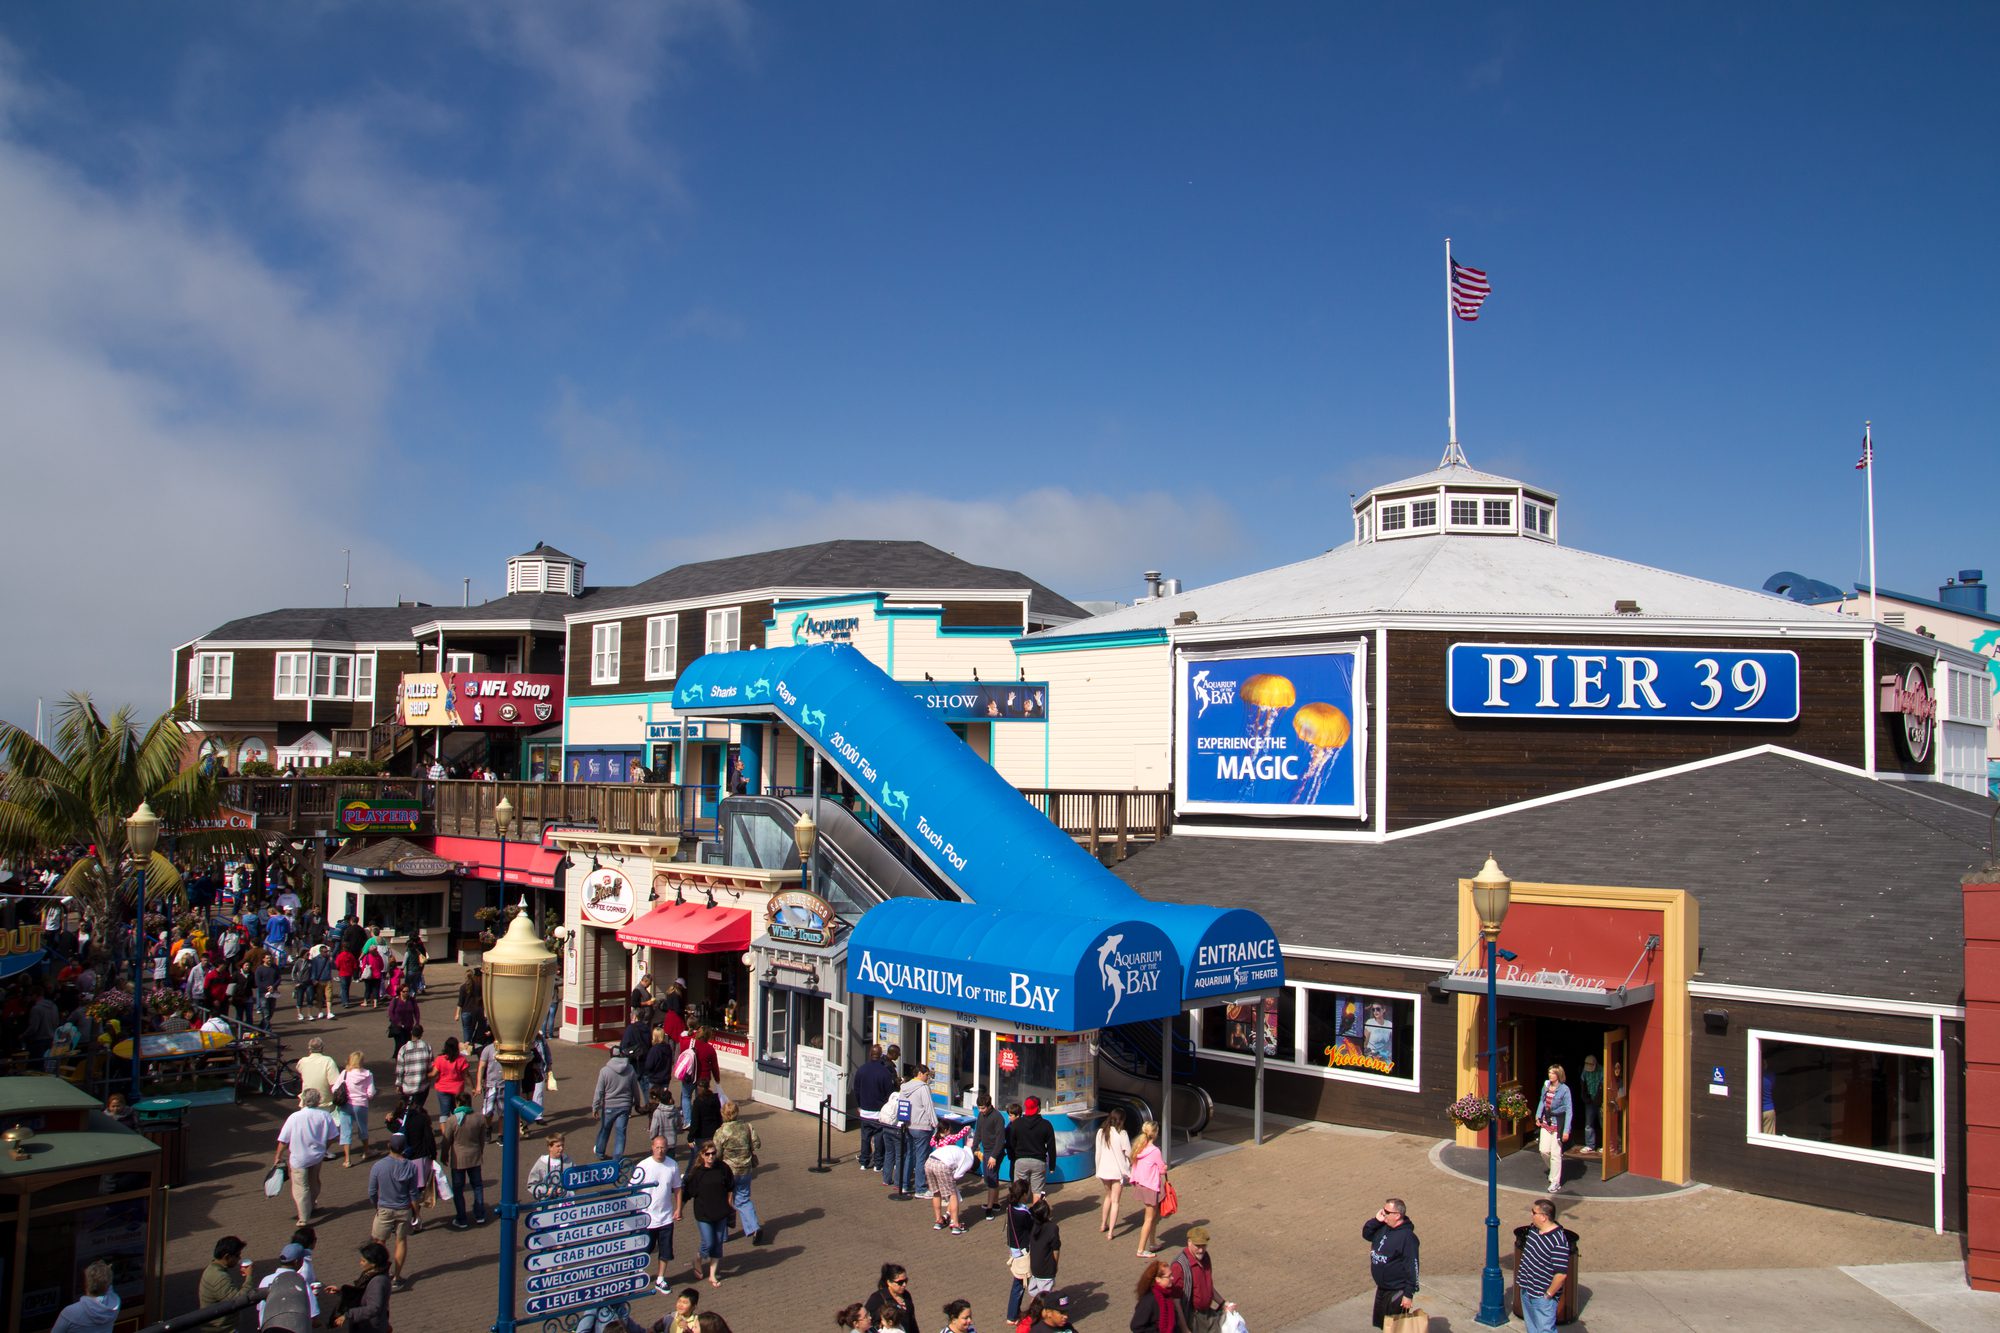 Check out Pier 39, one of many fun things to do in San Francisco